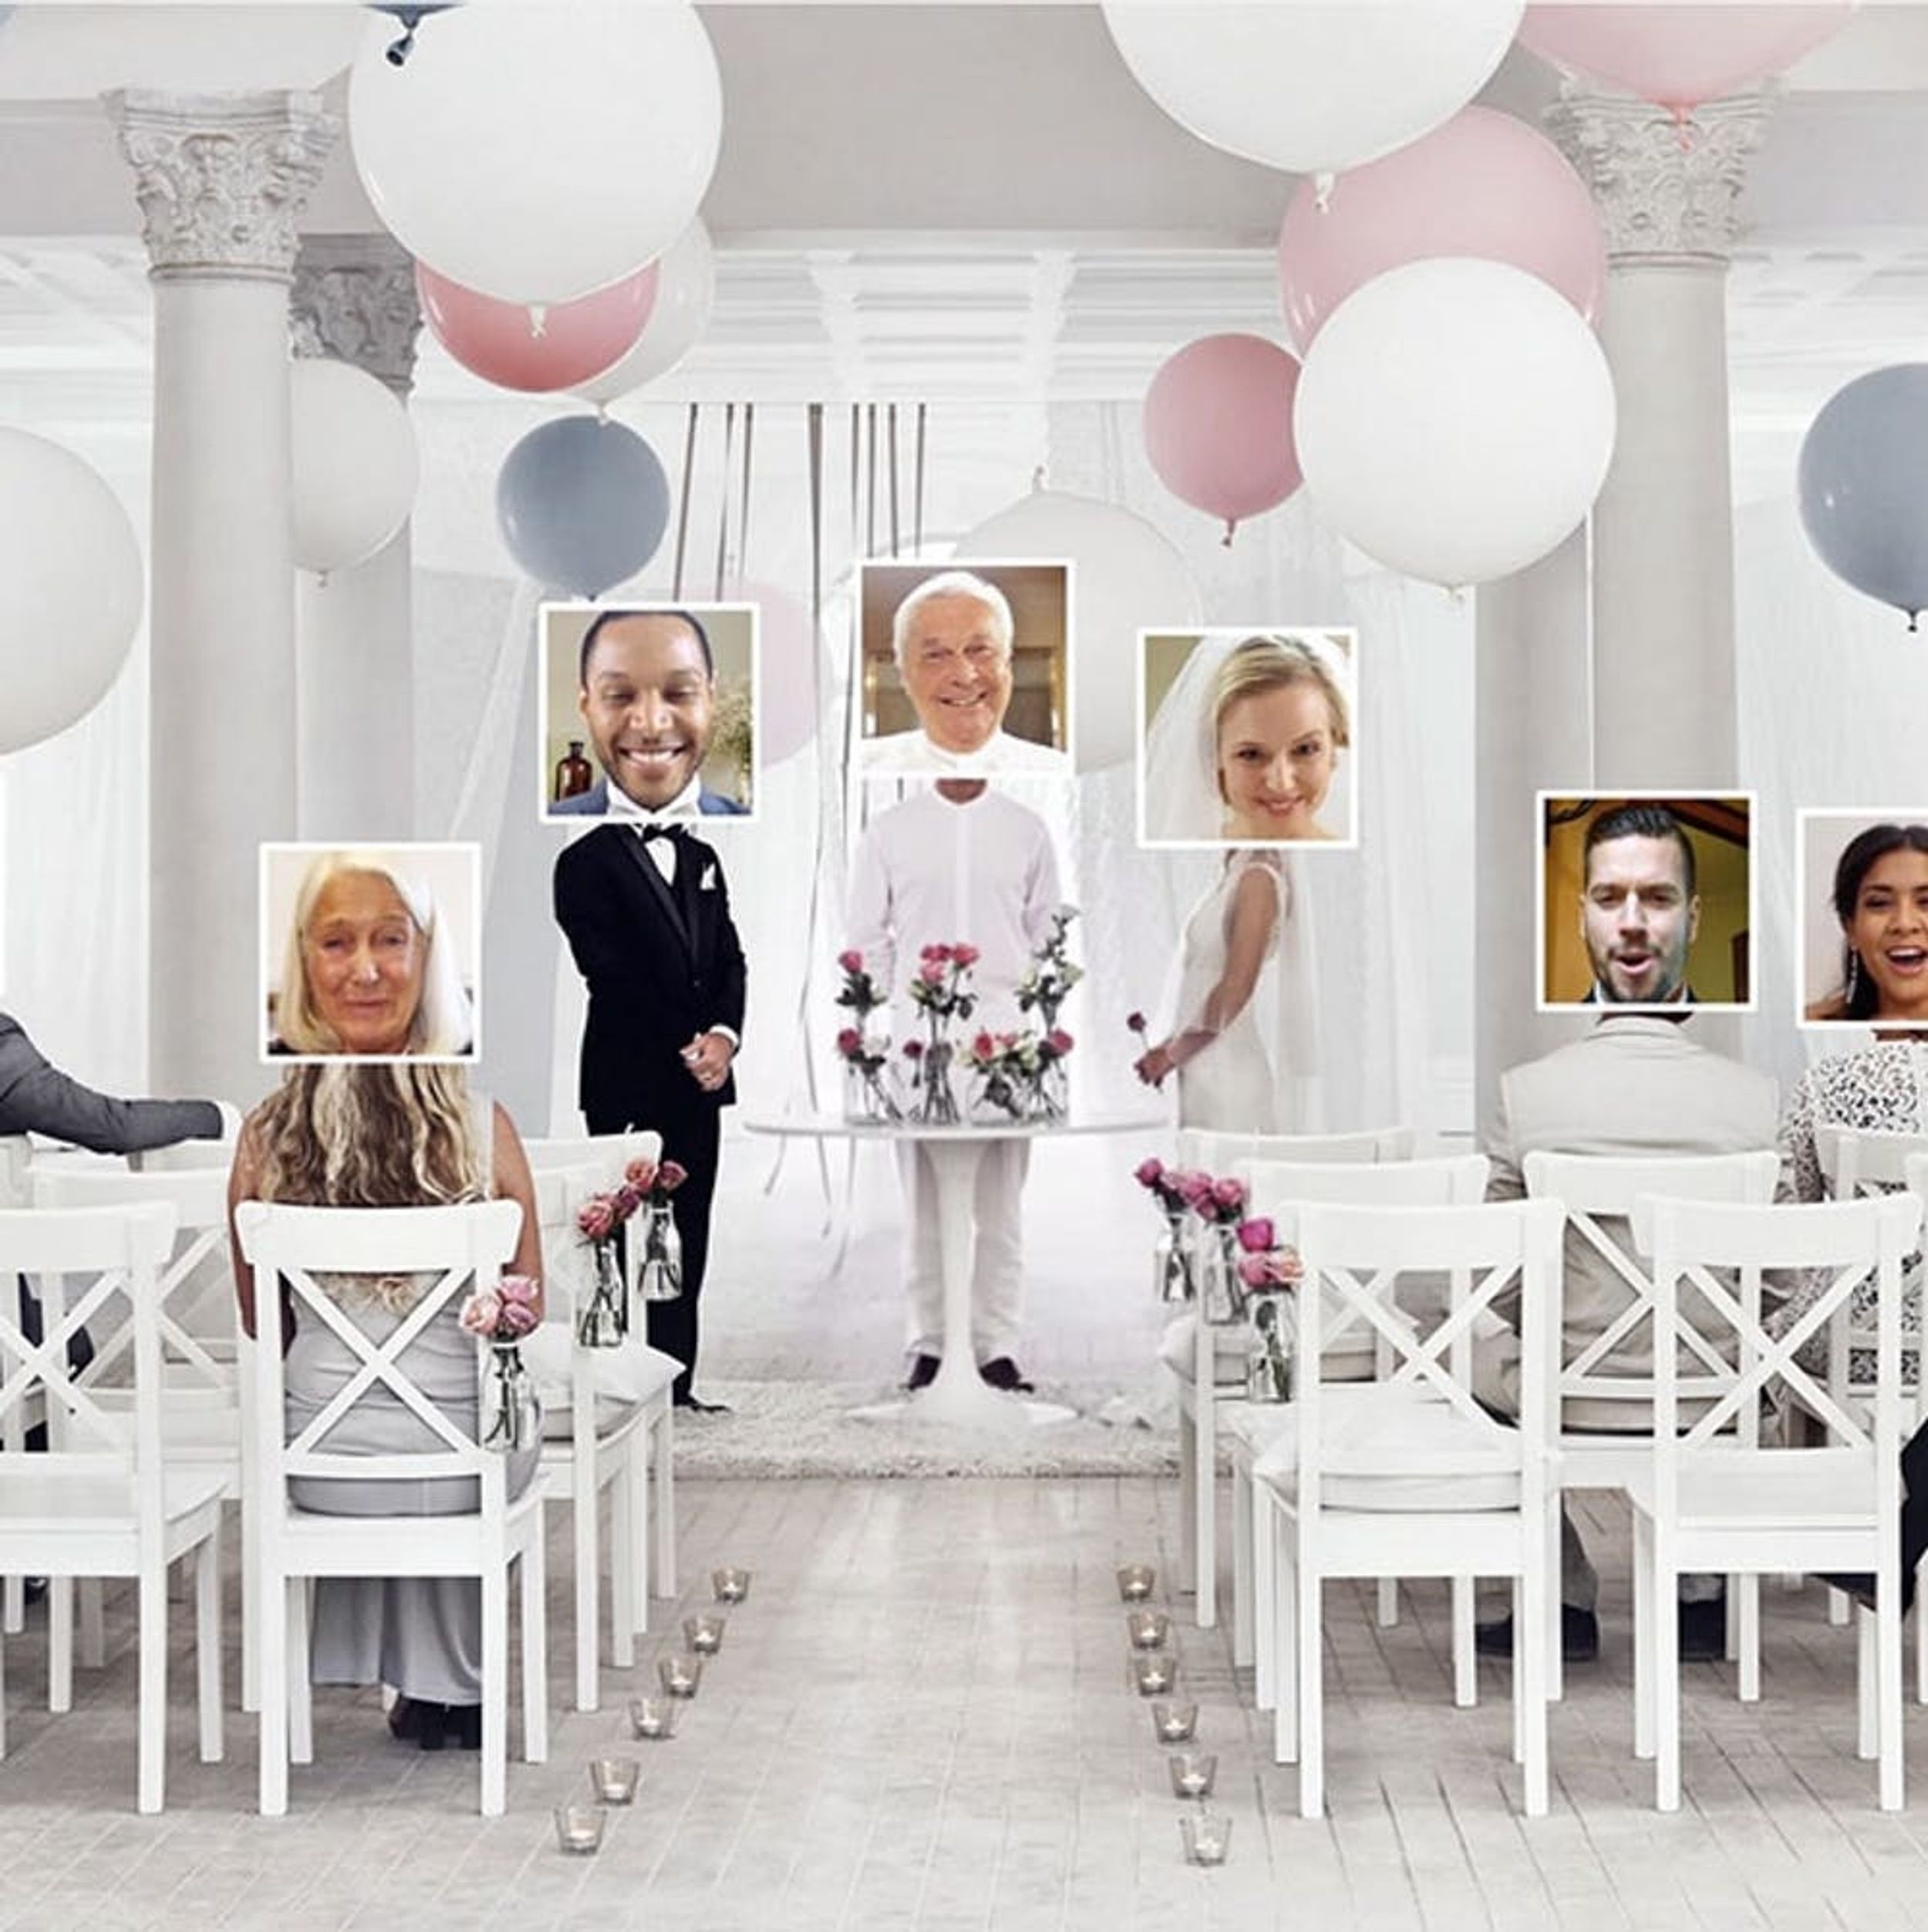 IKEA Wants You to Get Married Over Video Chat